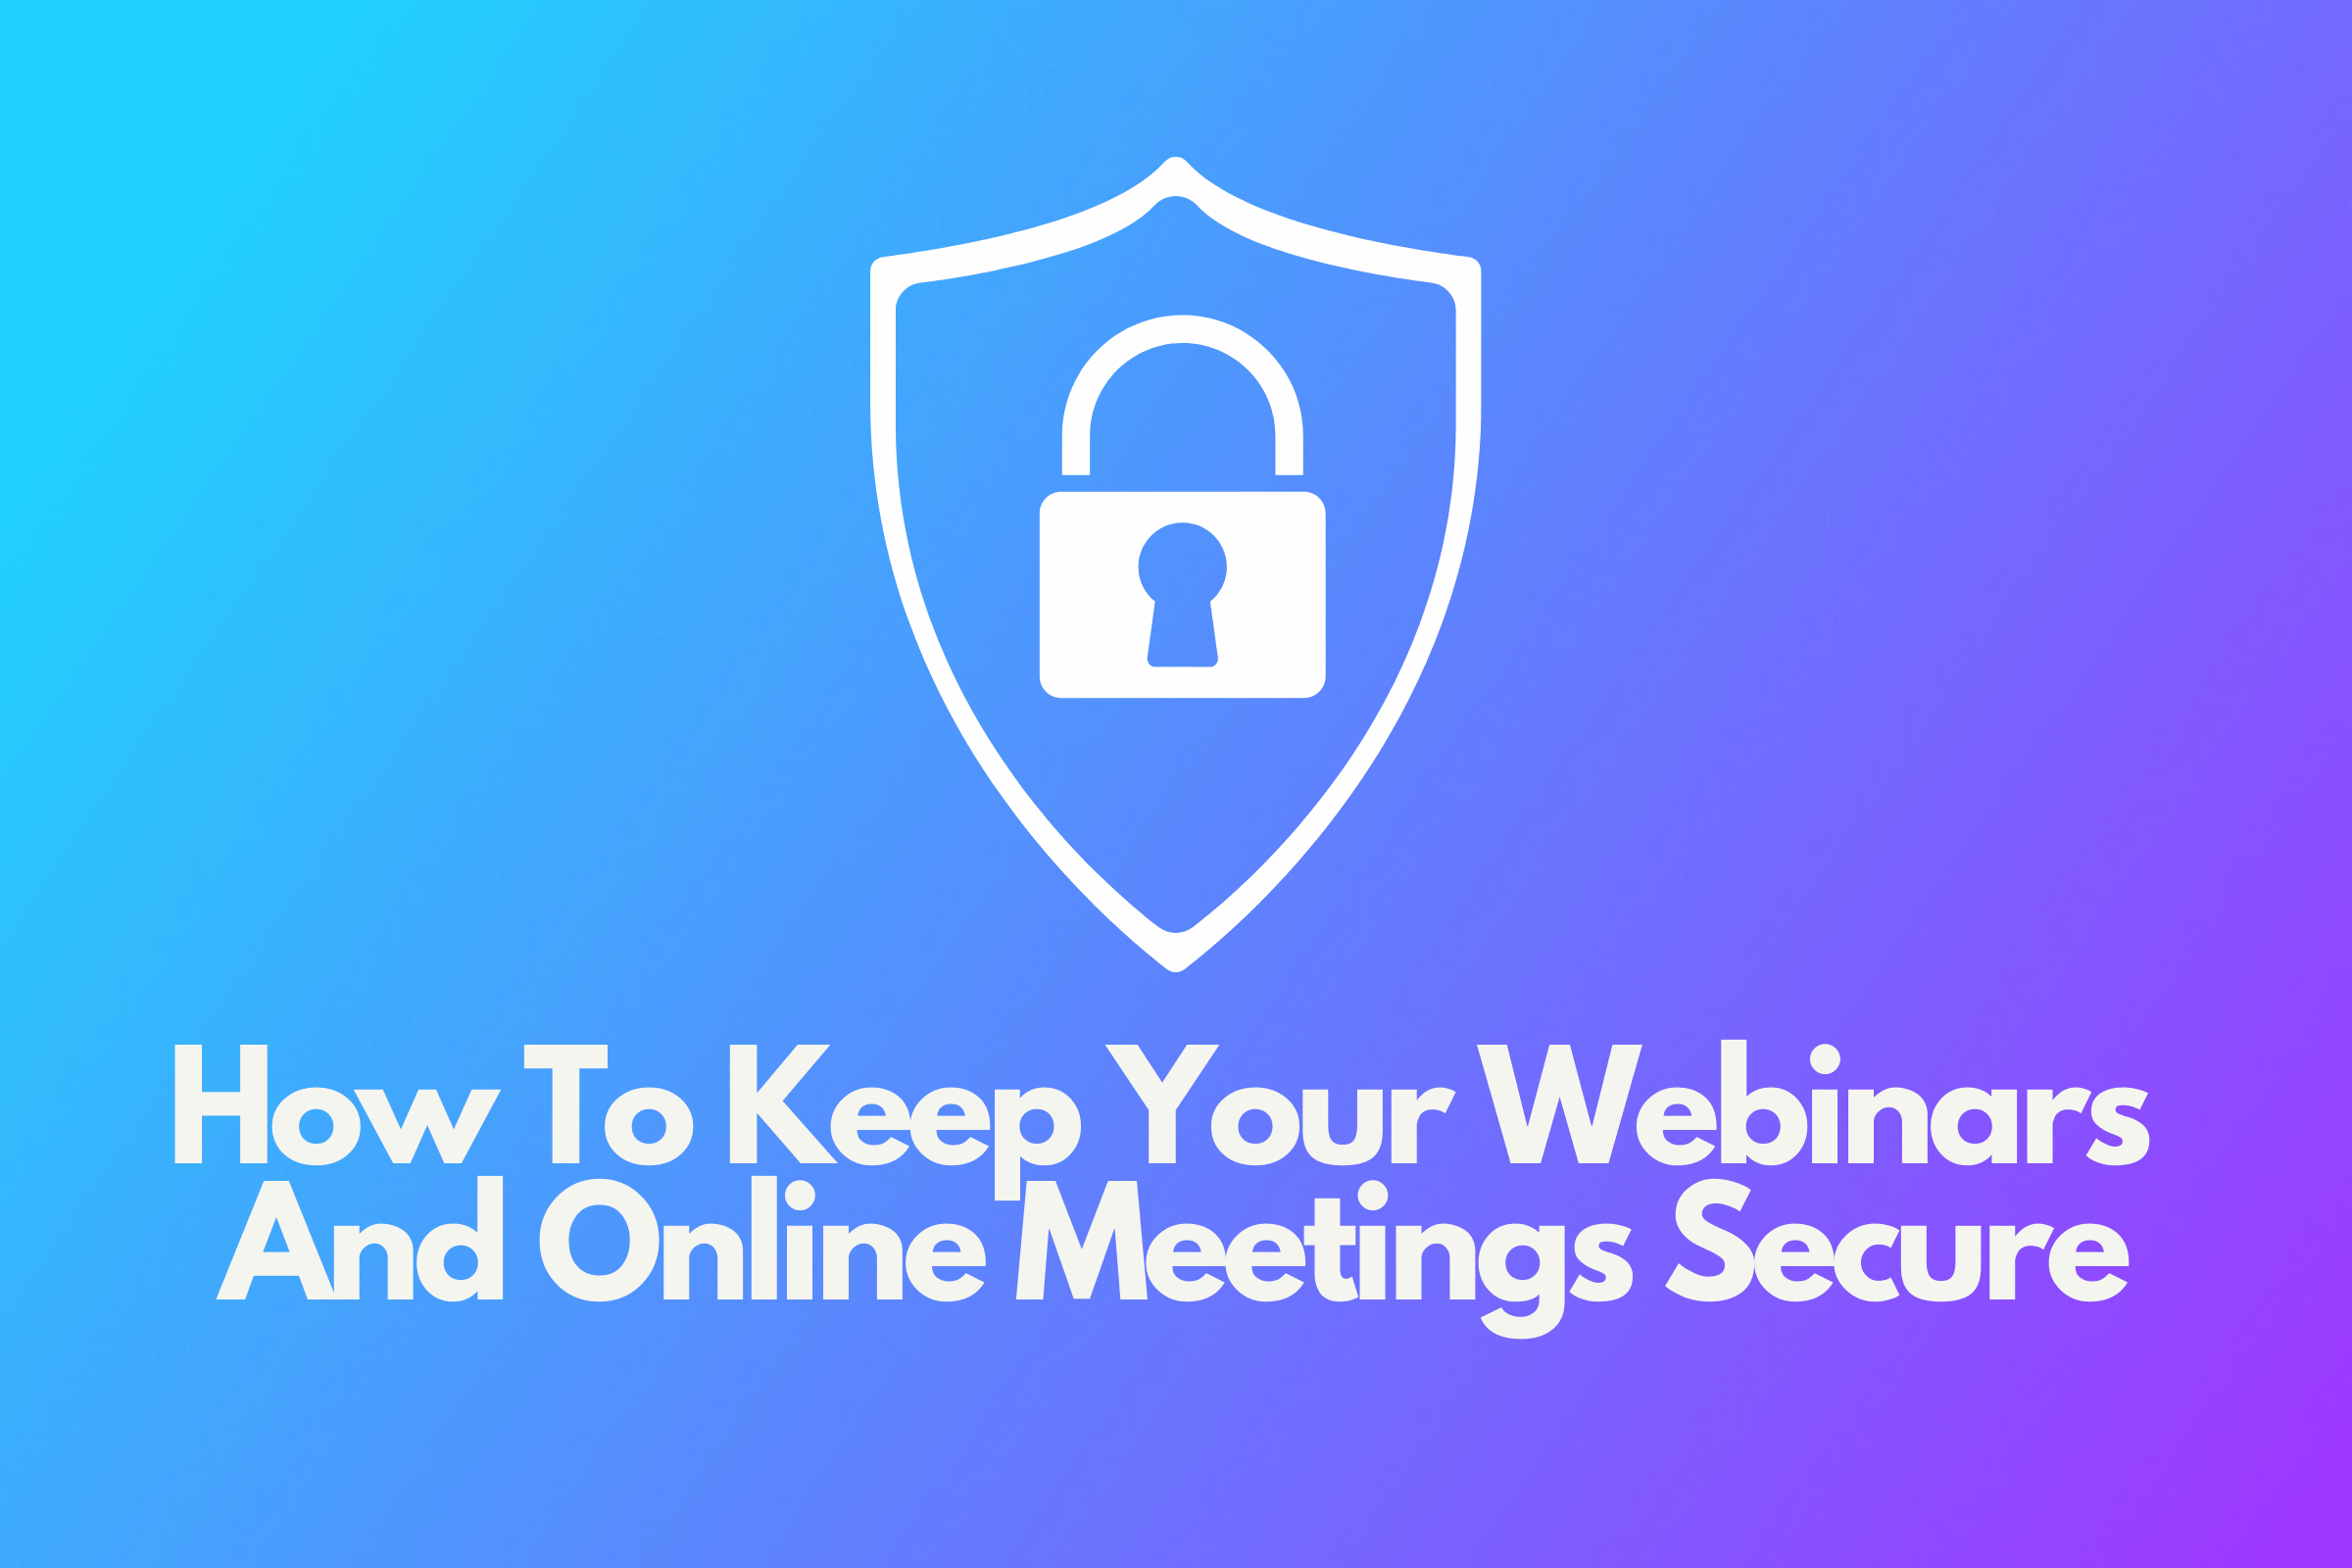 How To Keep Your Webinars And Online Meetings Secure